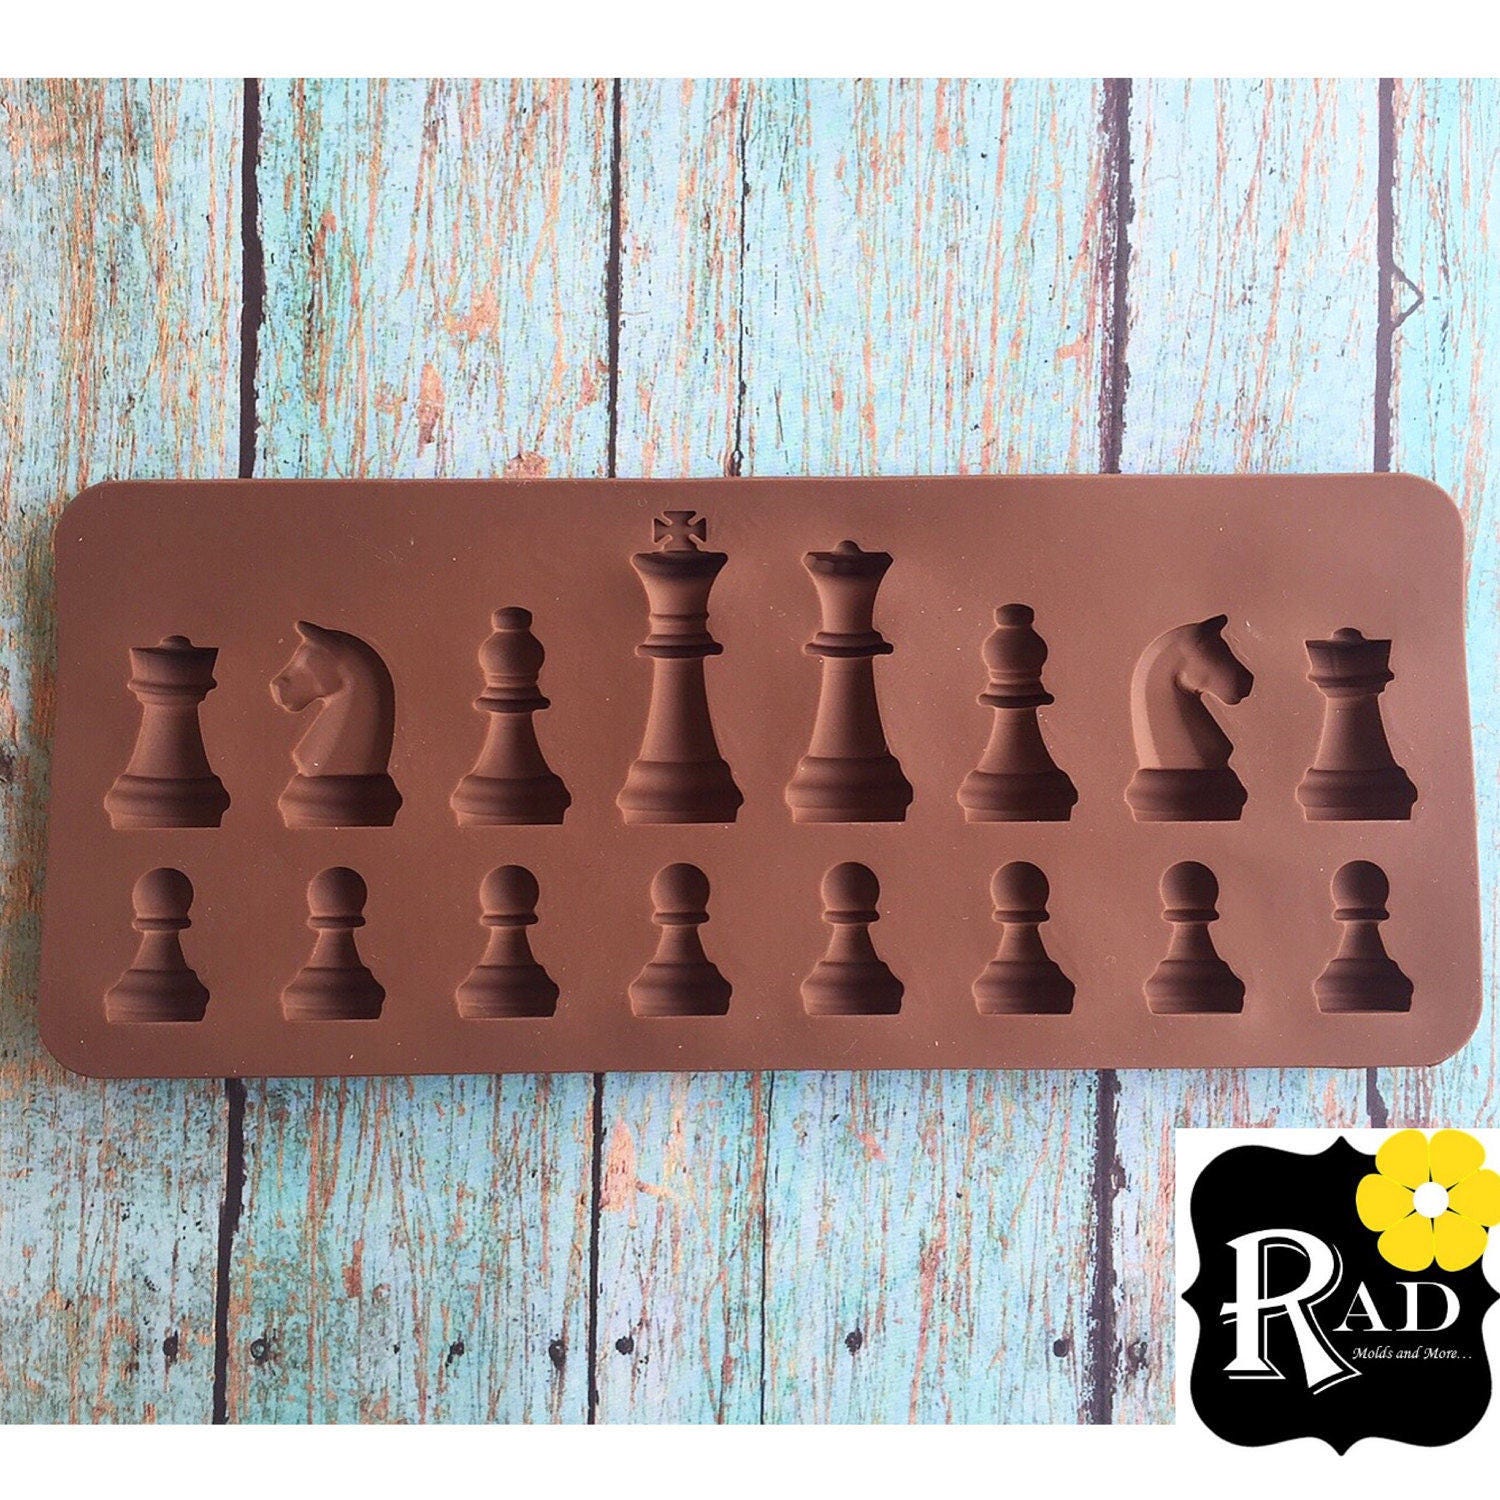 Fewo Chess Piece Silicone Fondant Mold Chess Shaped Chocolate Candy Mold Epoxy Resin Craft Casting Paper Clay Wax Melt Mold